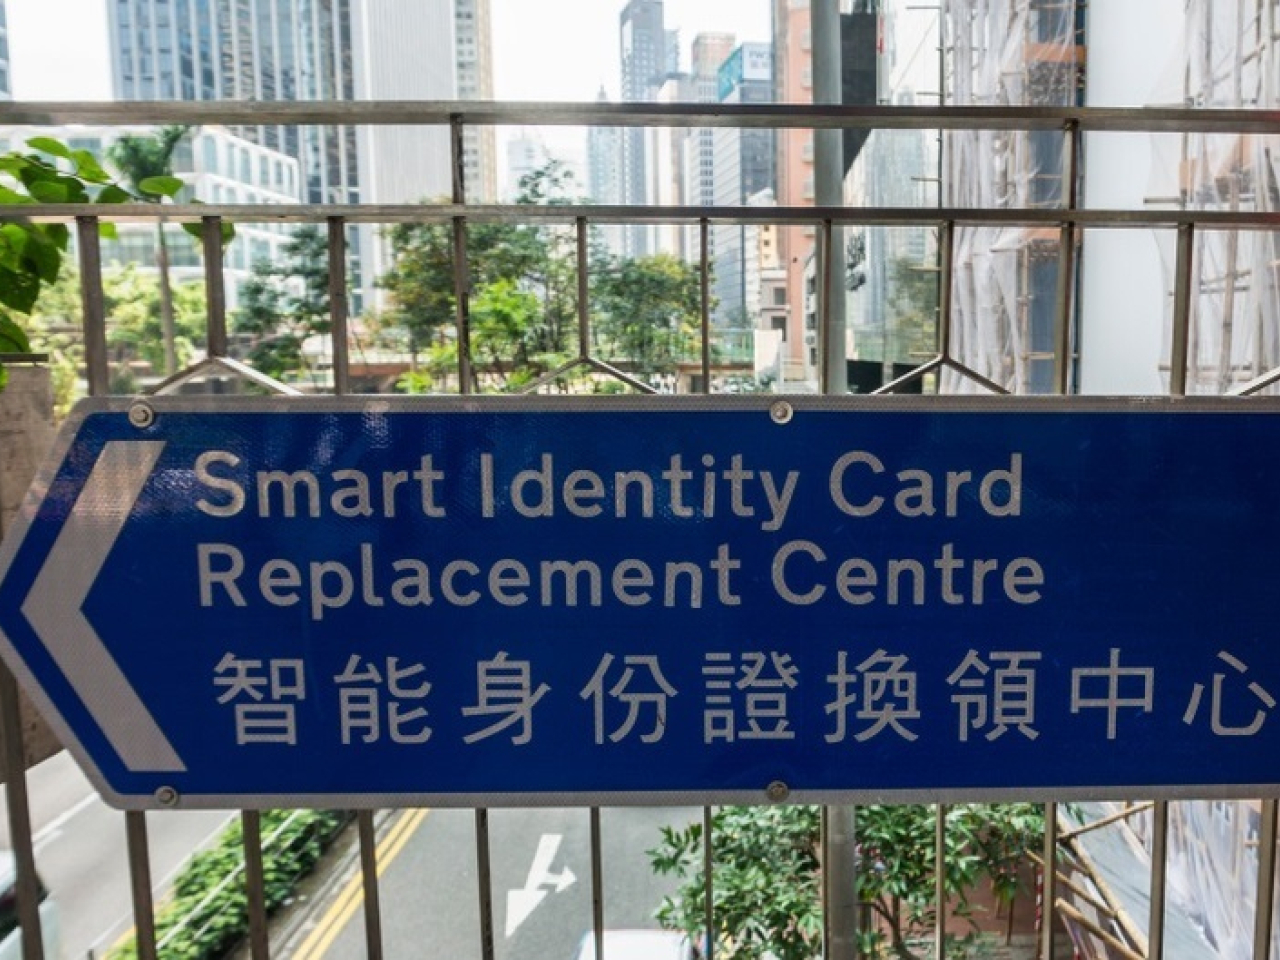 HK relaxes rules on ID card gender markers